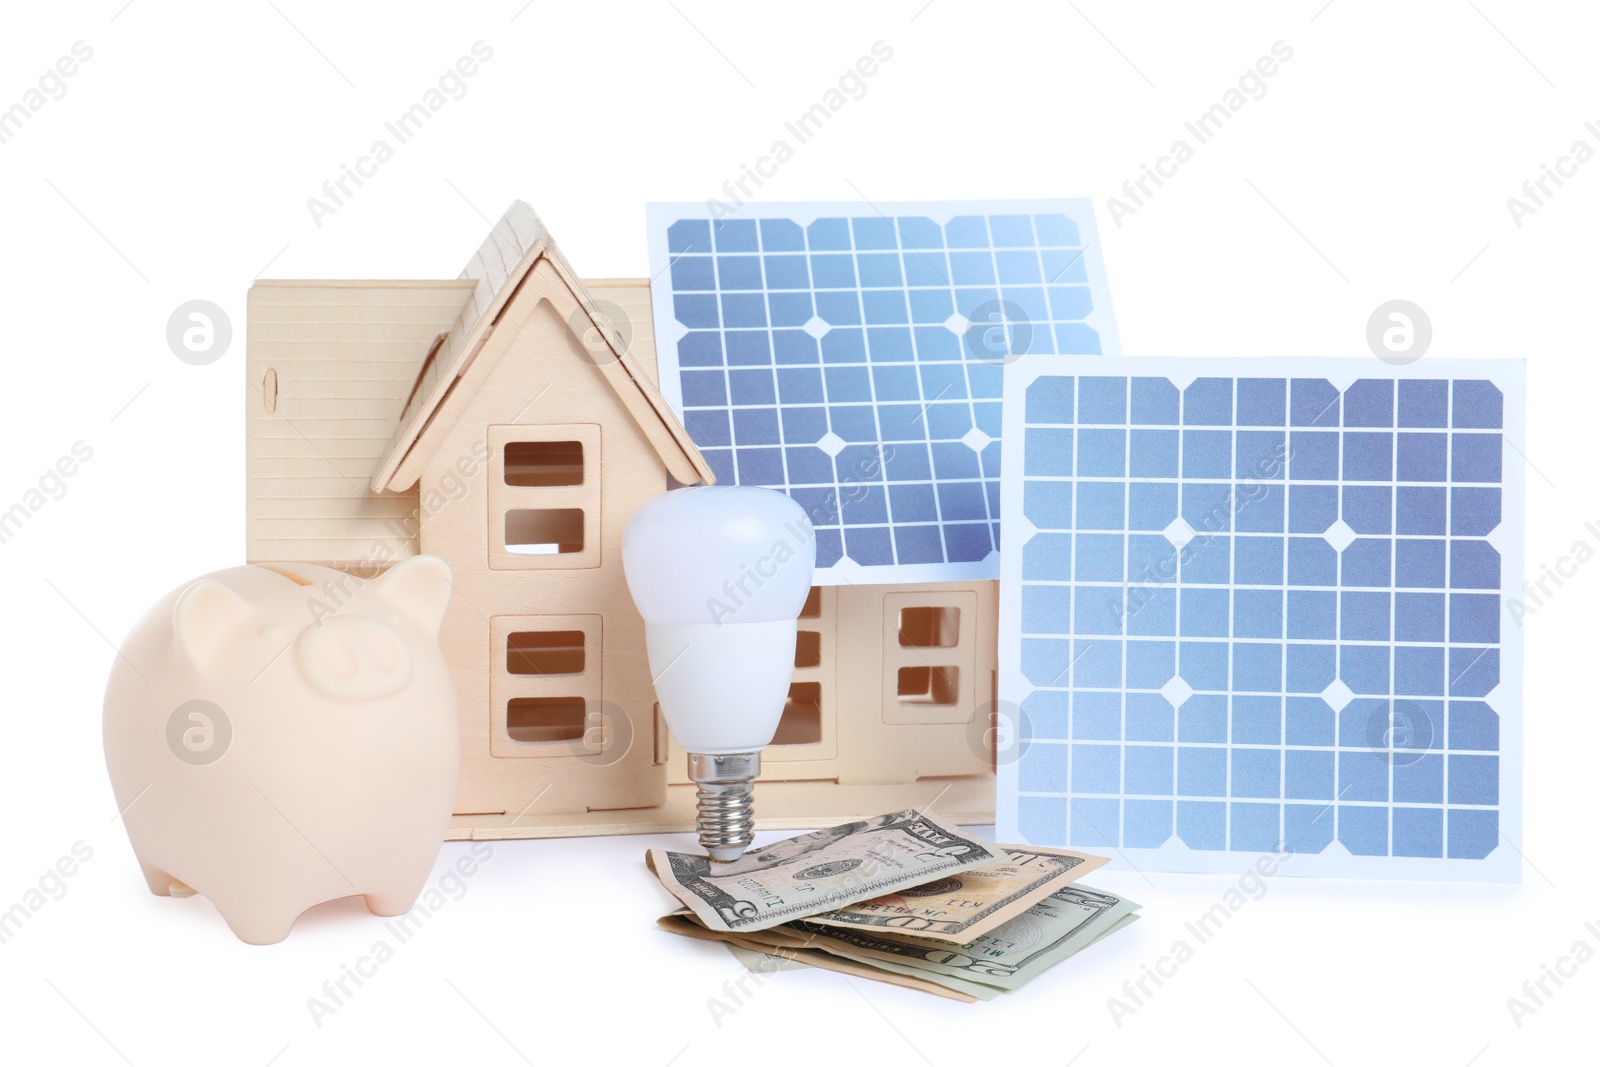 Photo of Composition with solar panels and wooden house model on white background